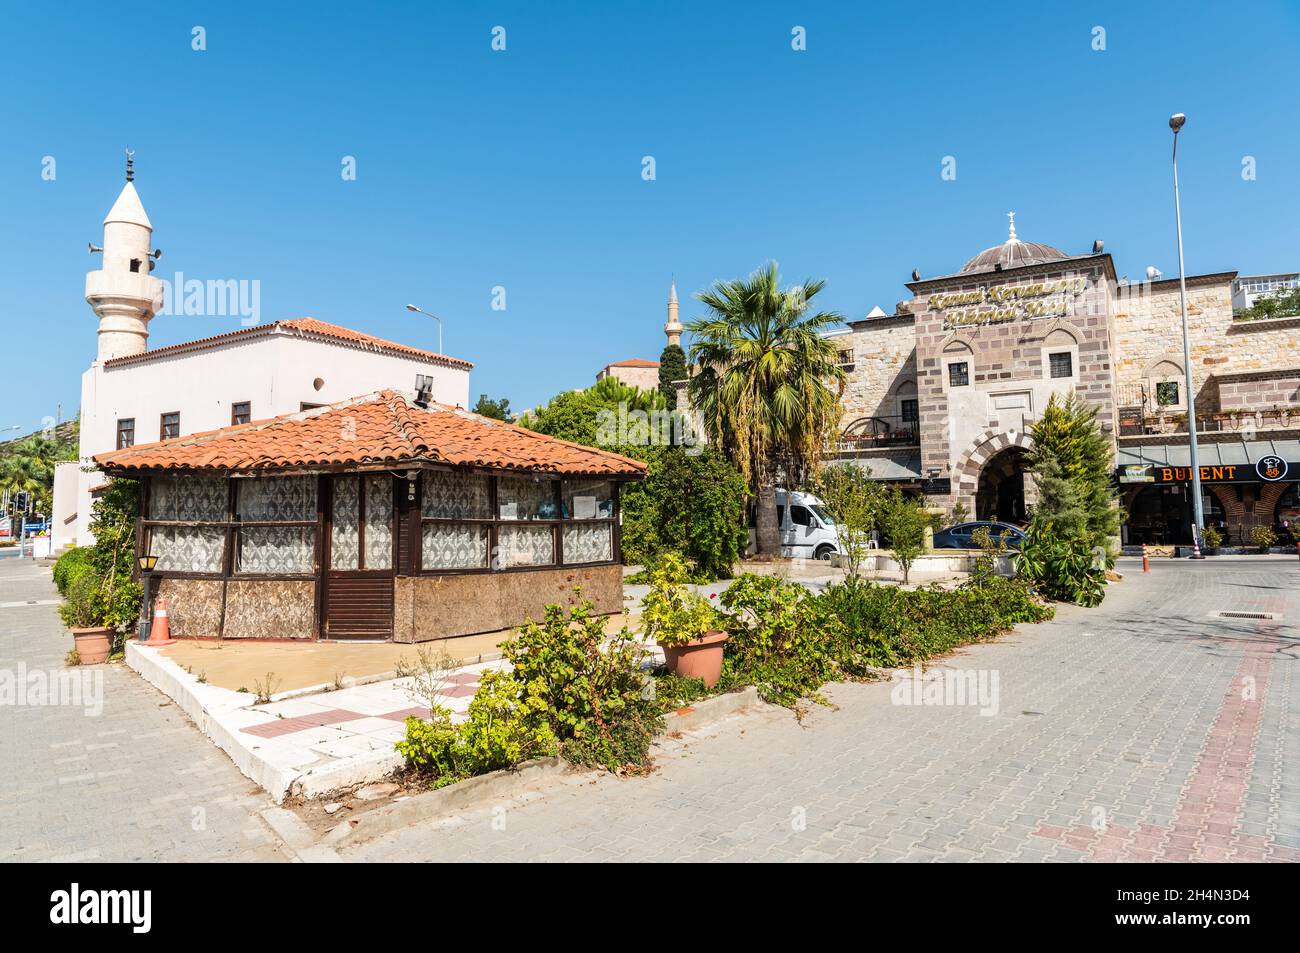 Cesme, Izmir, Turkey – October 4, 2020. View of a mosque and historic Ottoman caravanserai in Cesme resort town of Izmir province in Turkey. The carav Stock Photo